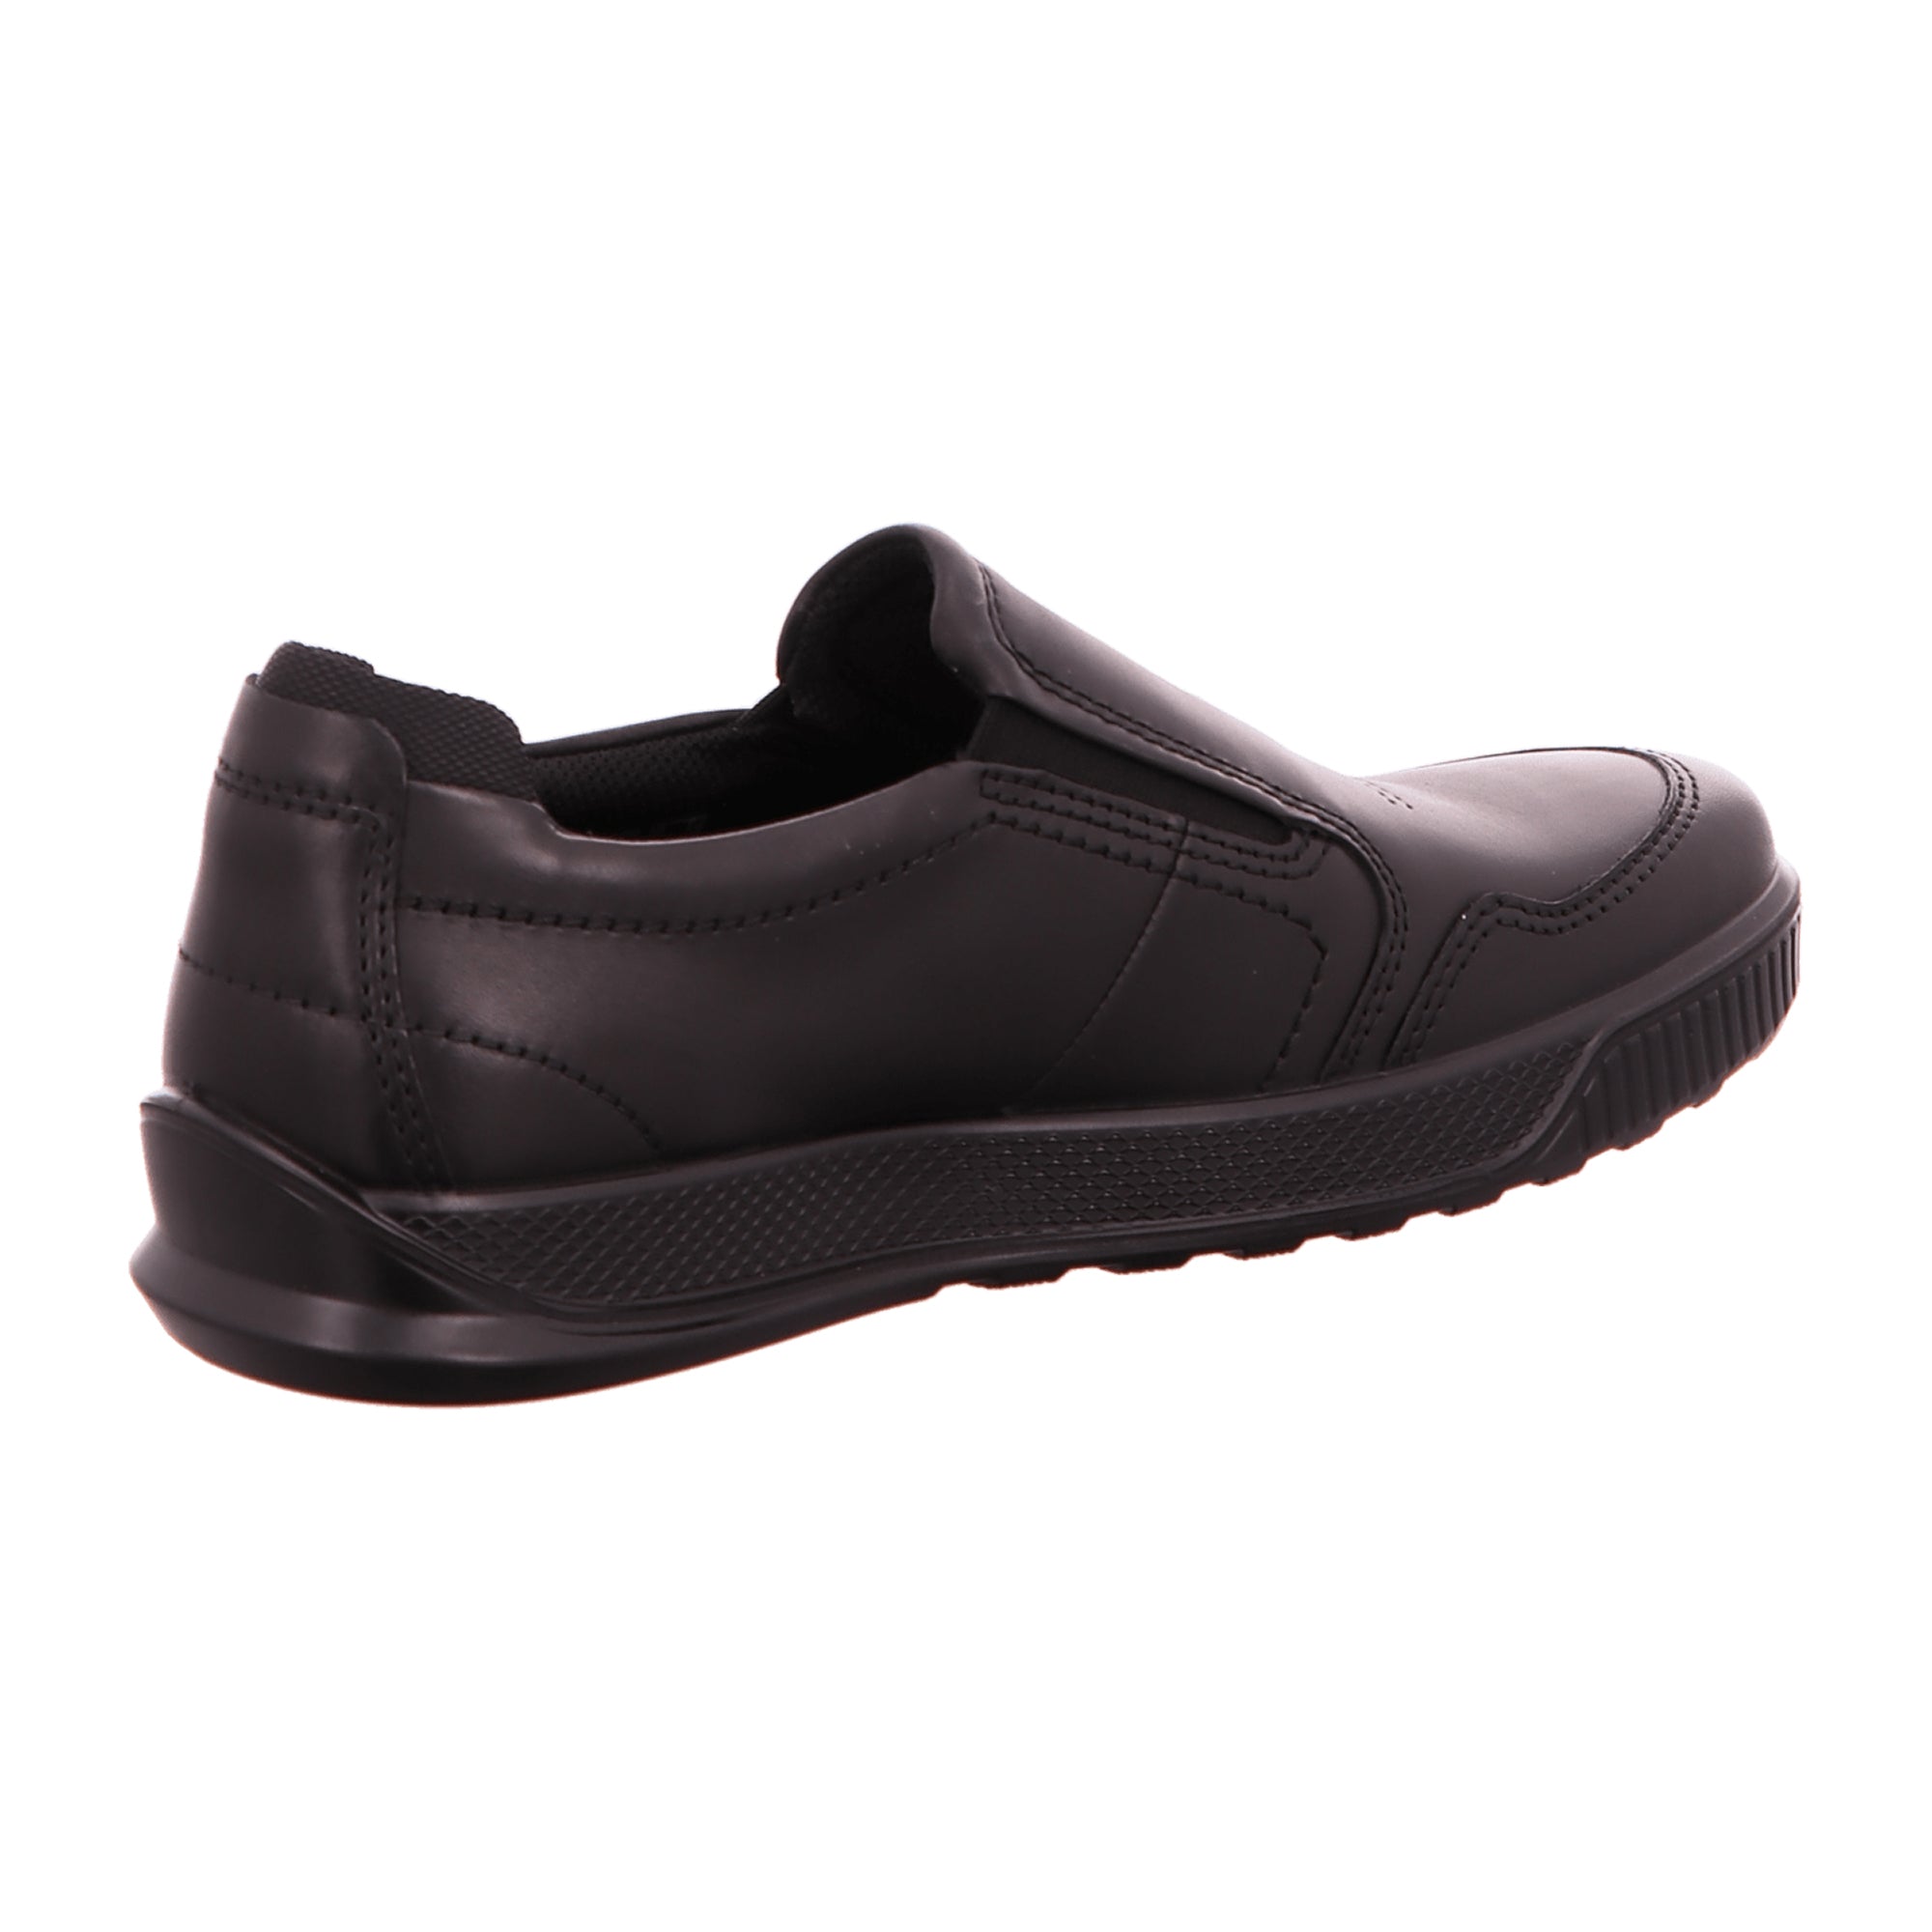 Ecco Byway Men's Casual Shoes, Black - Durable & Stylish